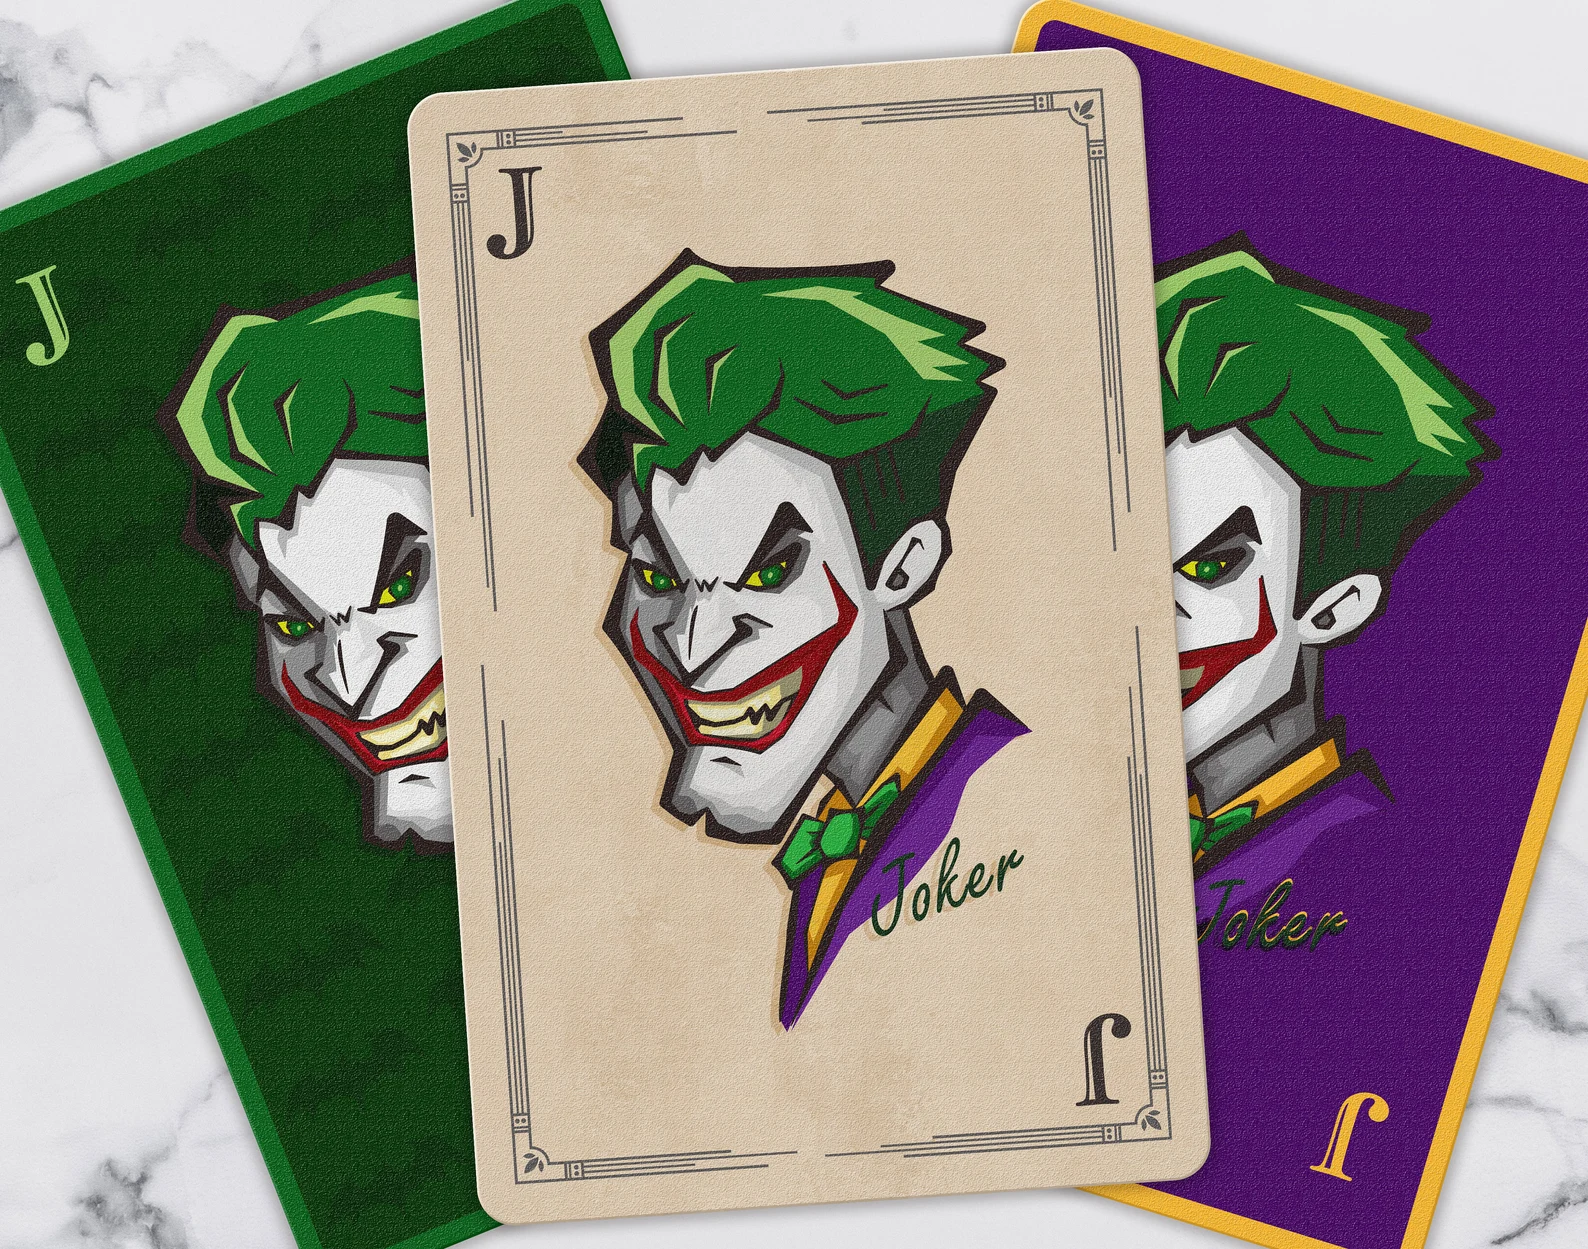 Three colors options of the background for Joker image.